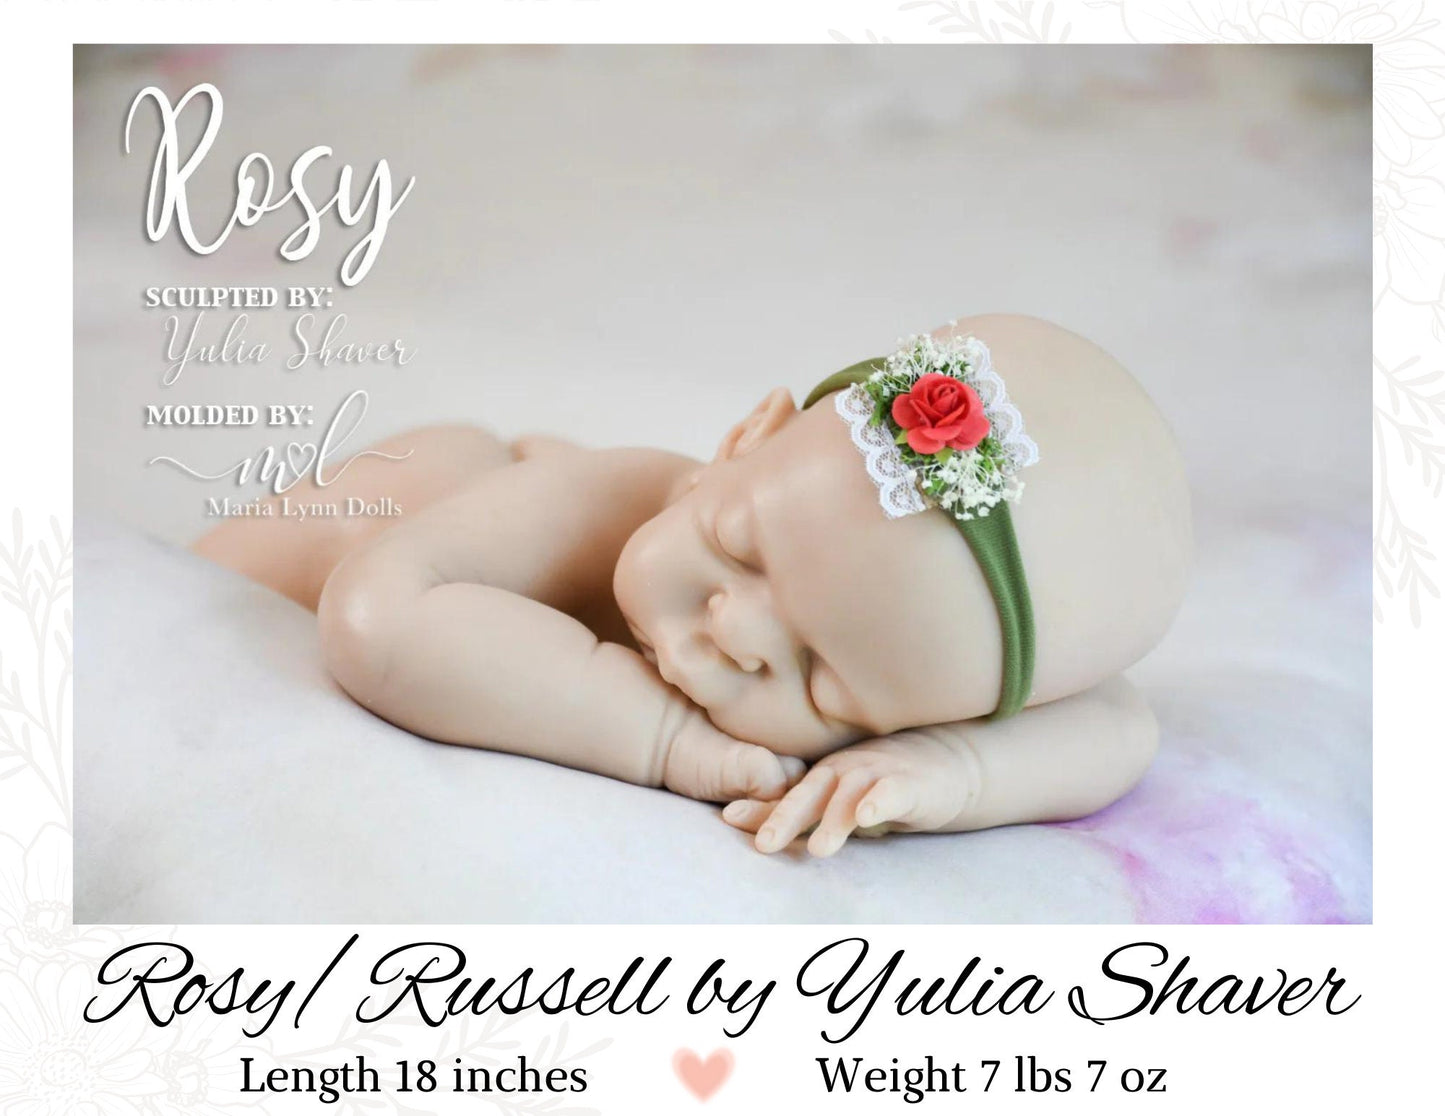 Full Body Silicone Baby Rosy/Russell by Yulia Shaver (18 inches 7 lbs 7 oz) *includes pictures of my own work in silicone.